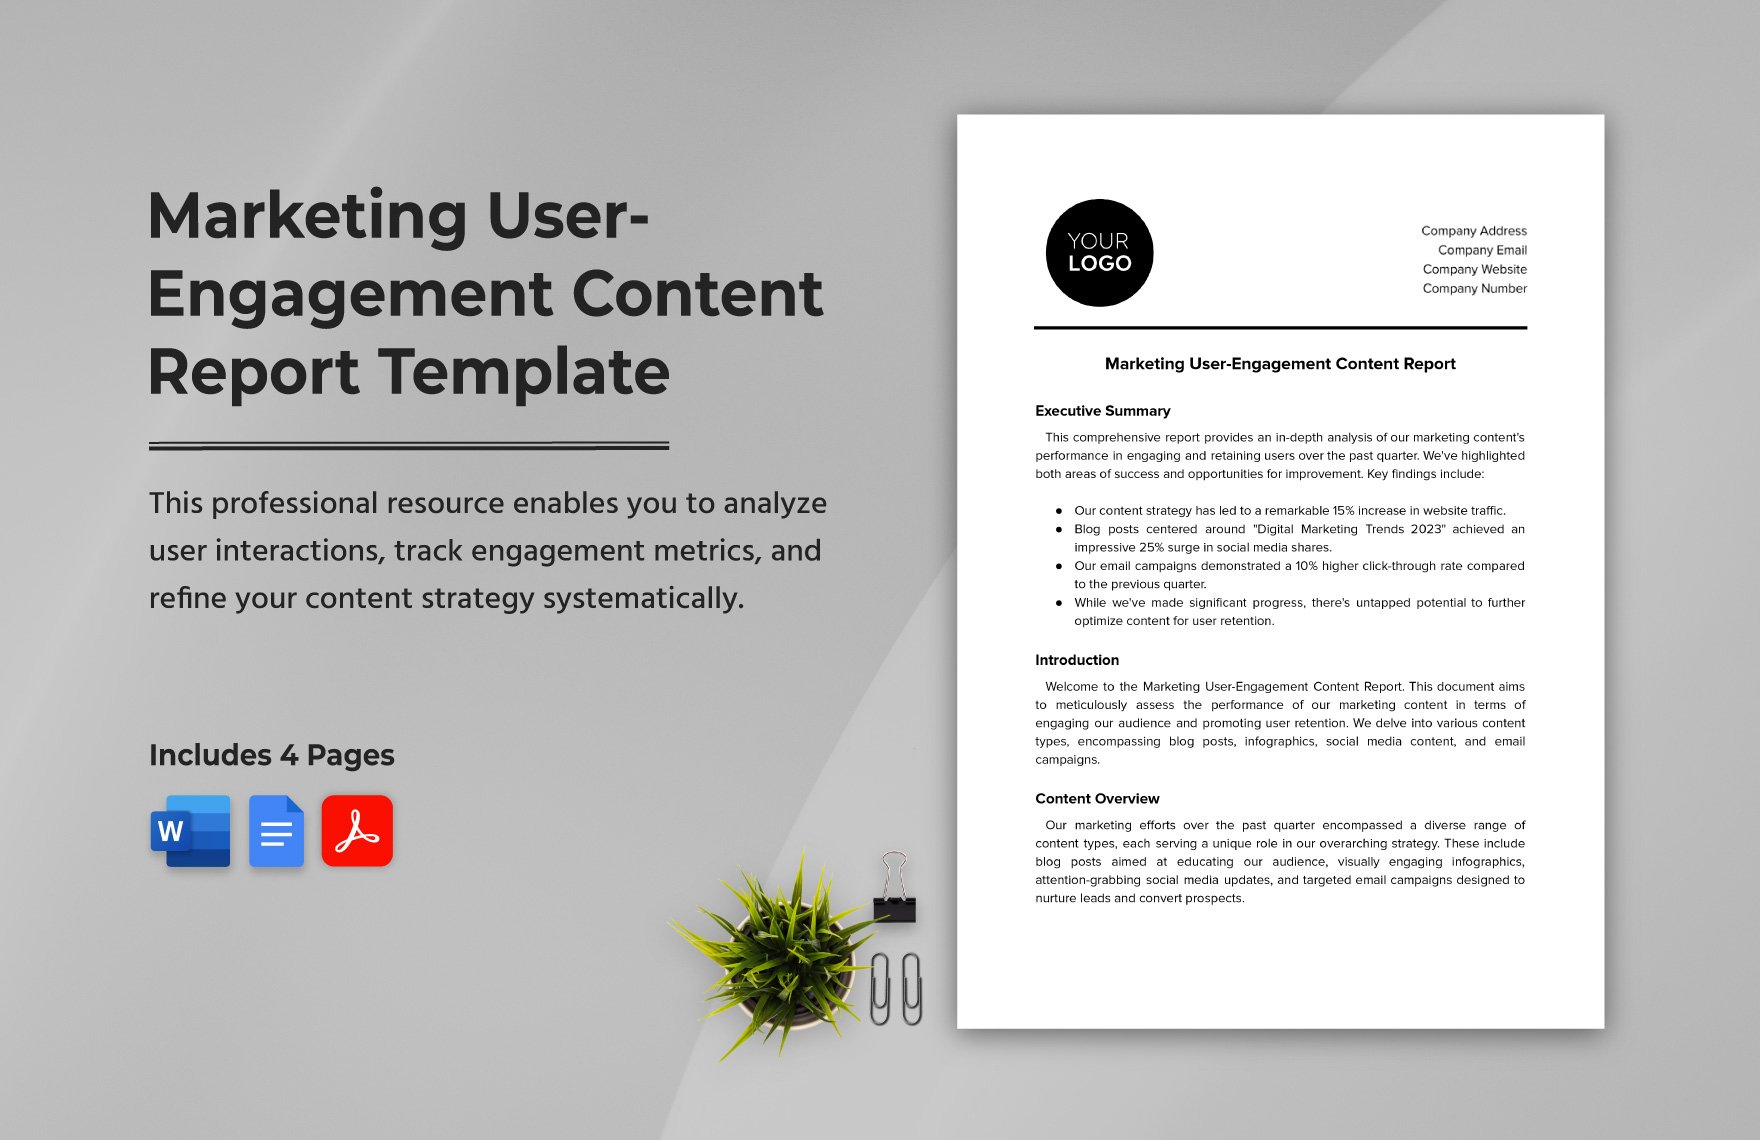 Marketing Content Promotion Resolution Template in Word, Google Docs, PDF